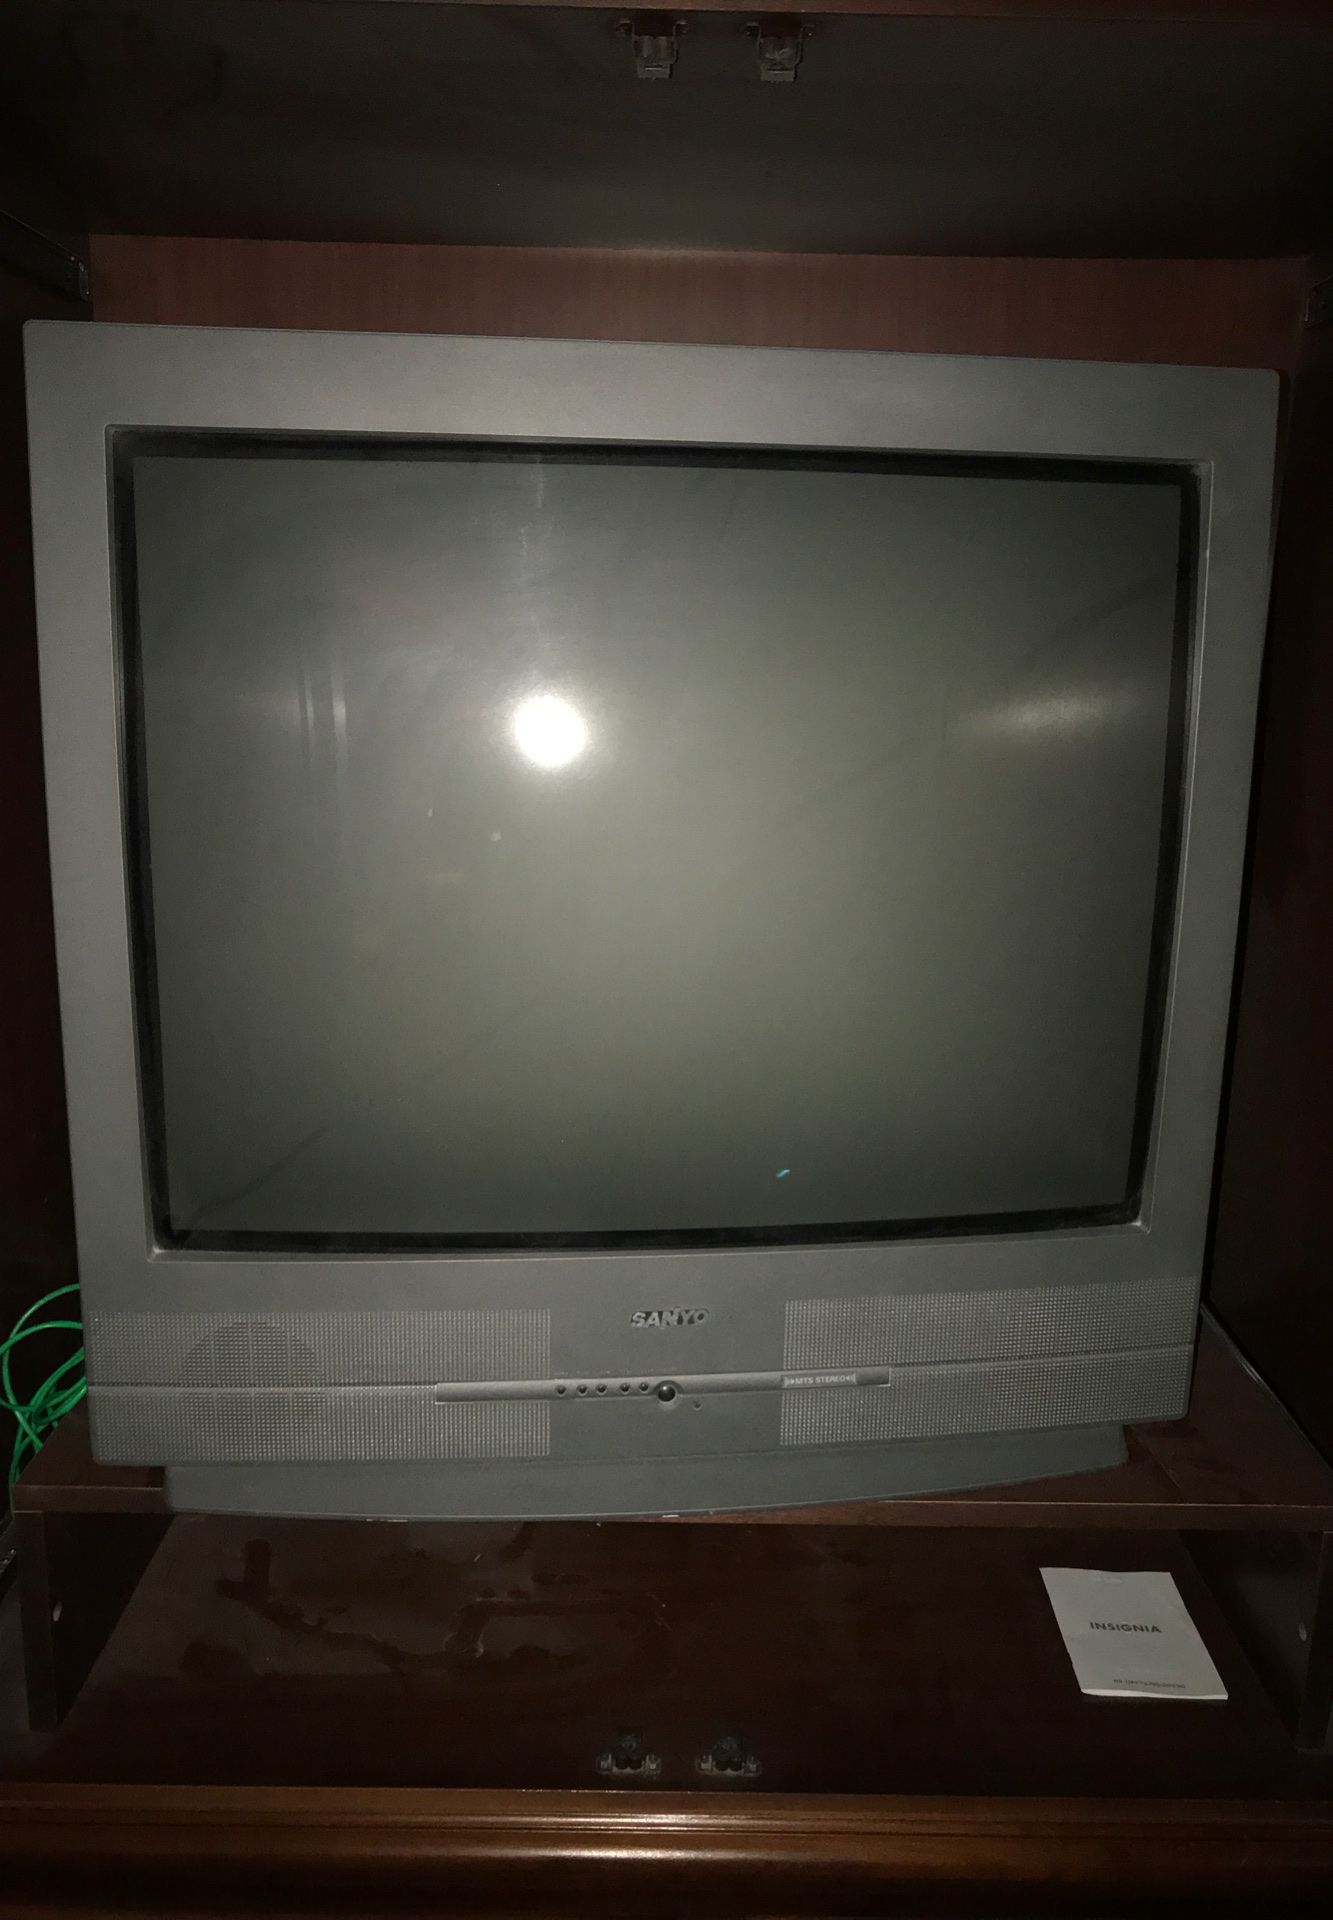 Sanyo 32 inches works great picture FREE! Come and get it. Also Panasonic works FREE as well!!